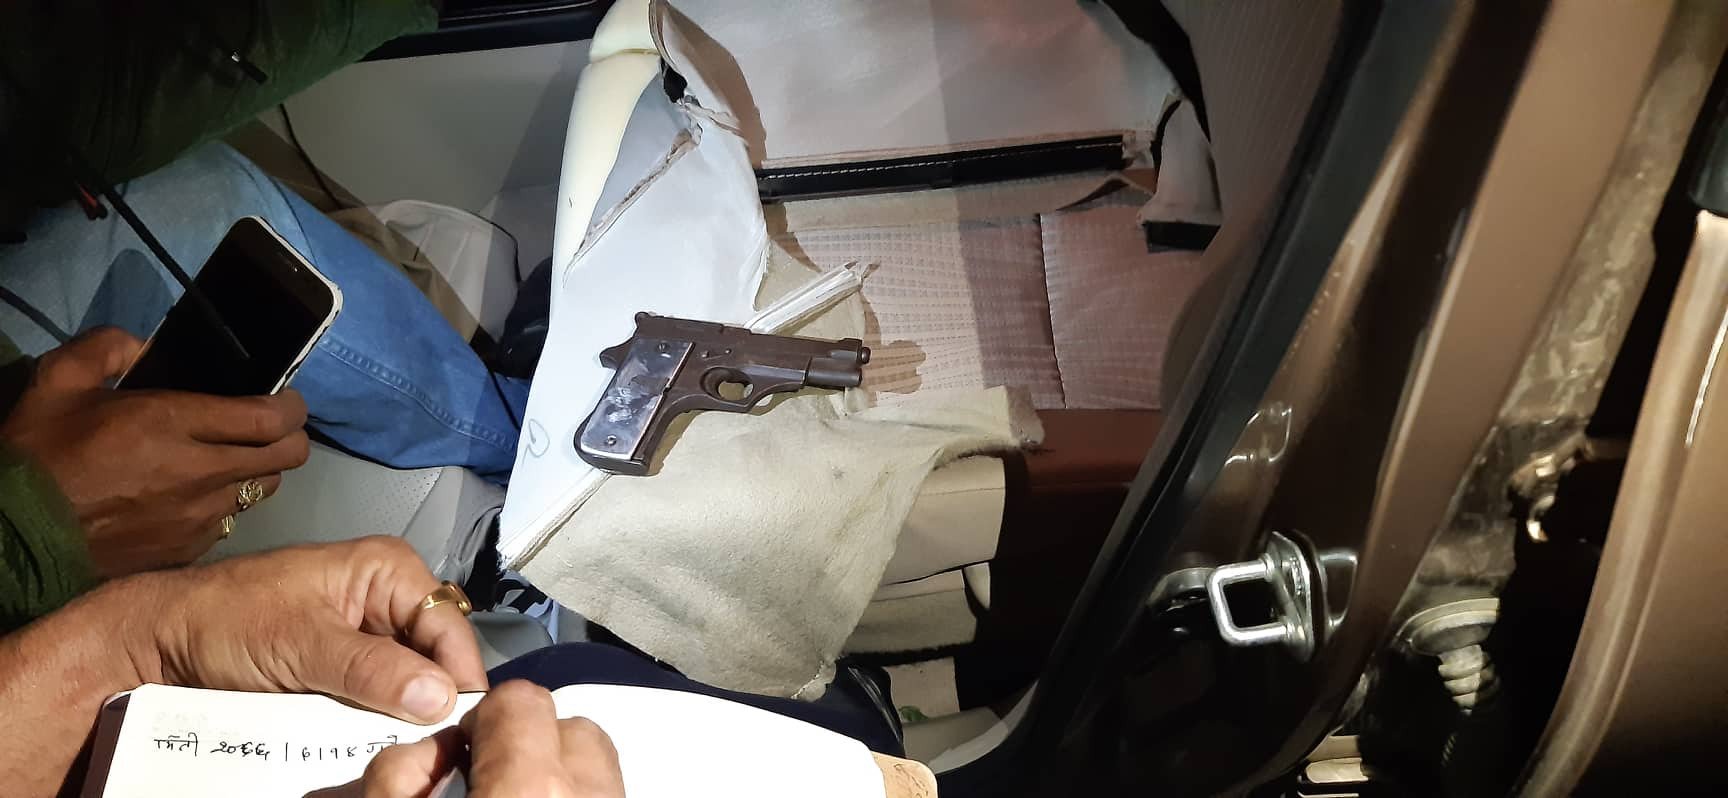 Nepal Tarun Dal leader arrested with pistol